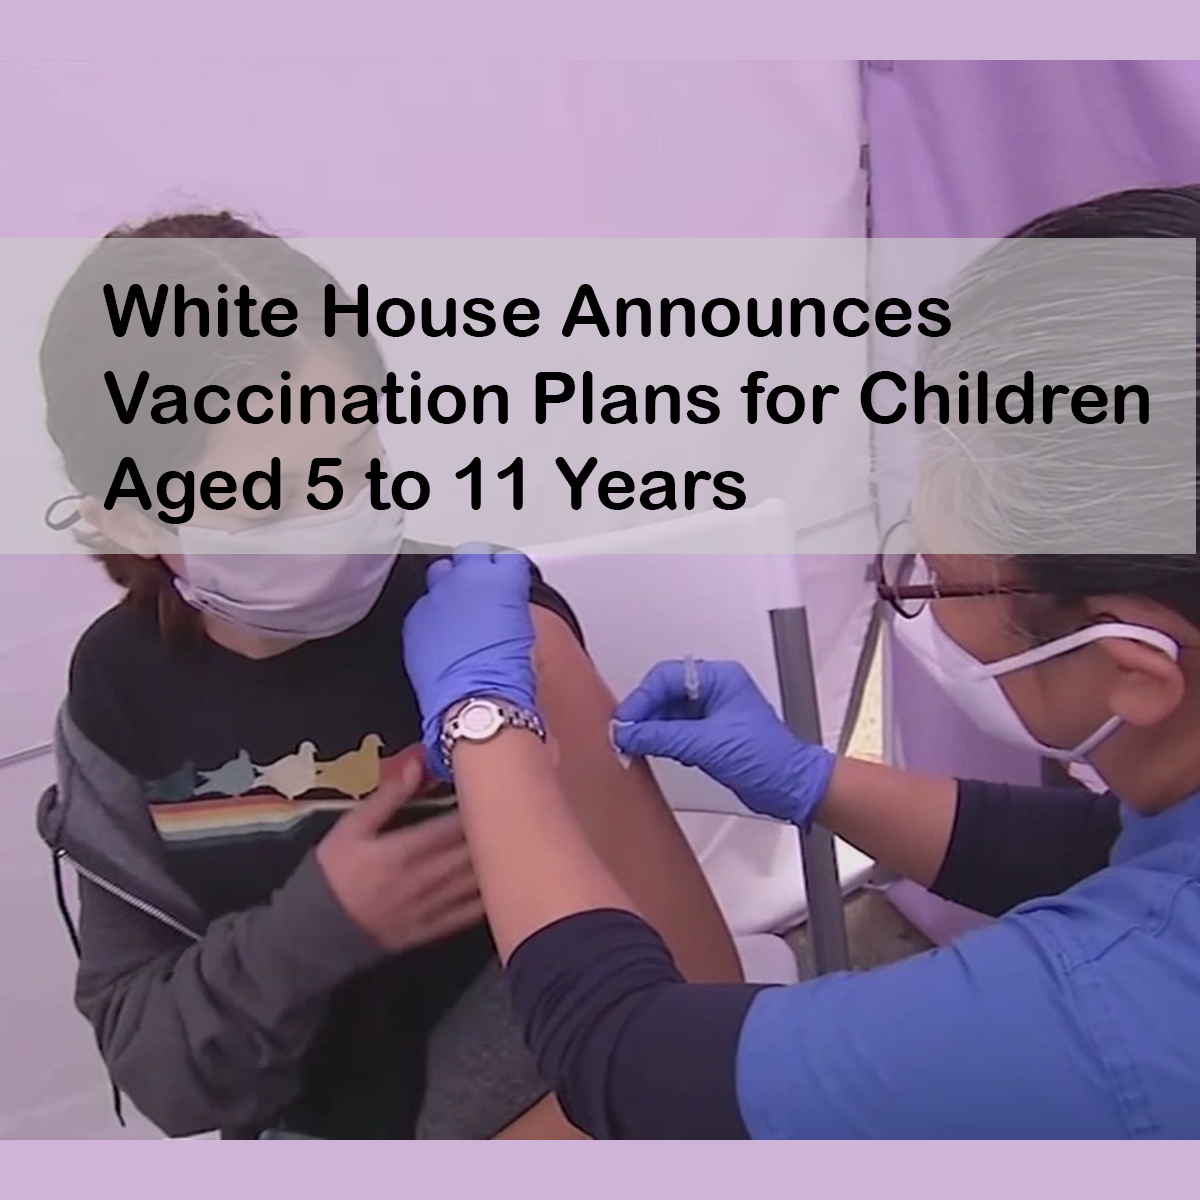 White House Announces Vaccination Plans for Children Aged 5 to 11 Years